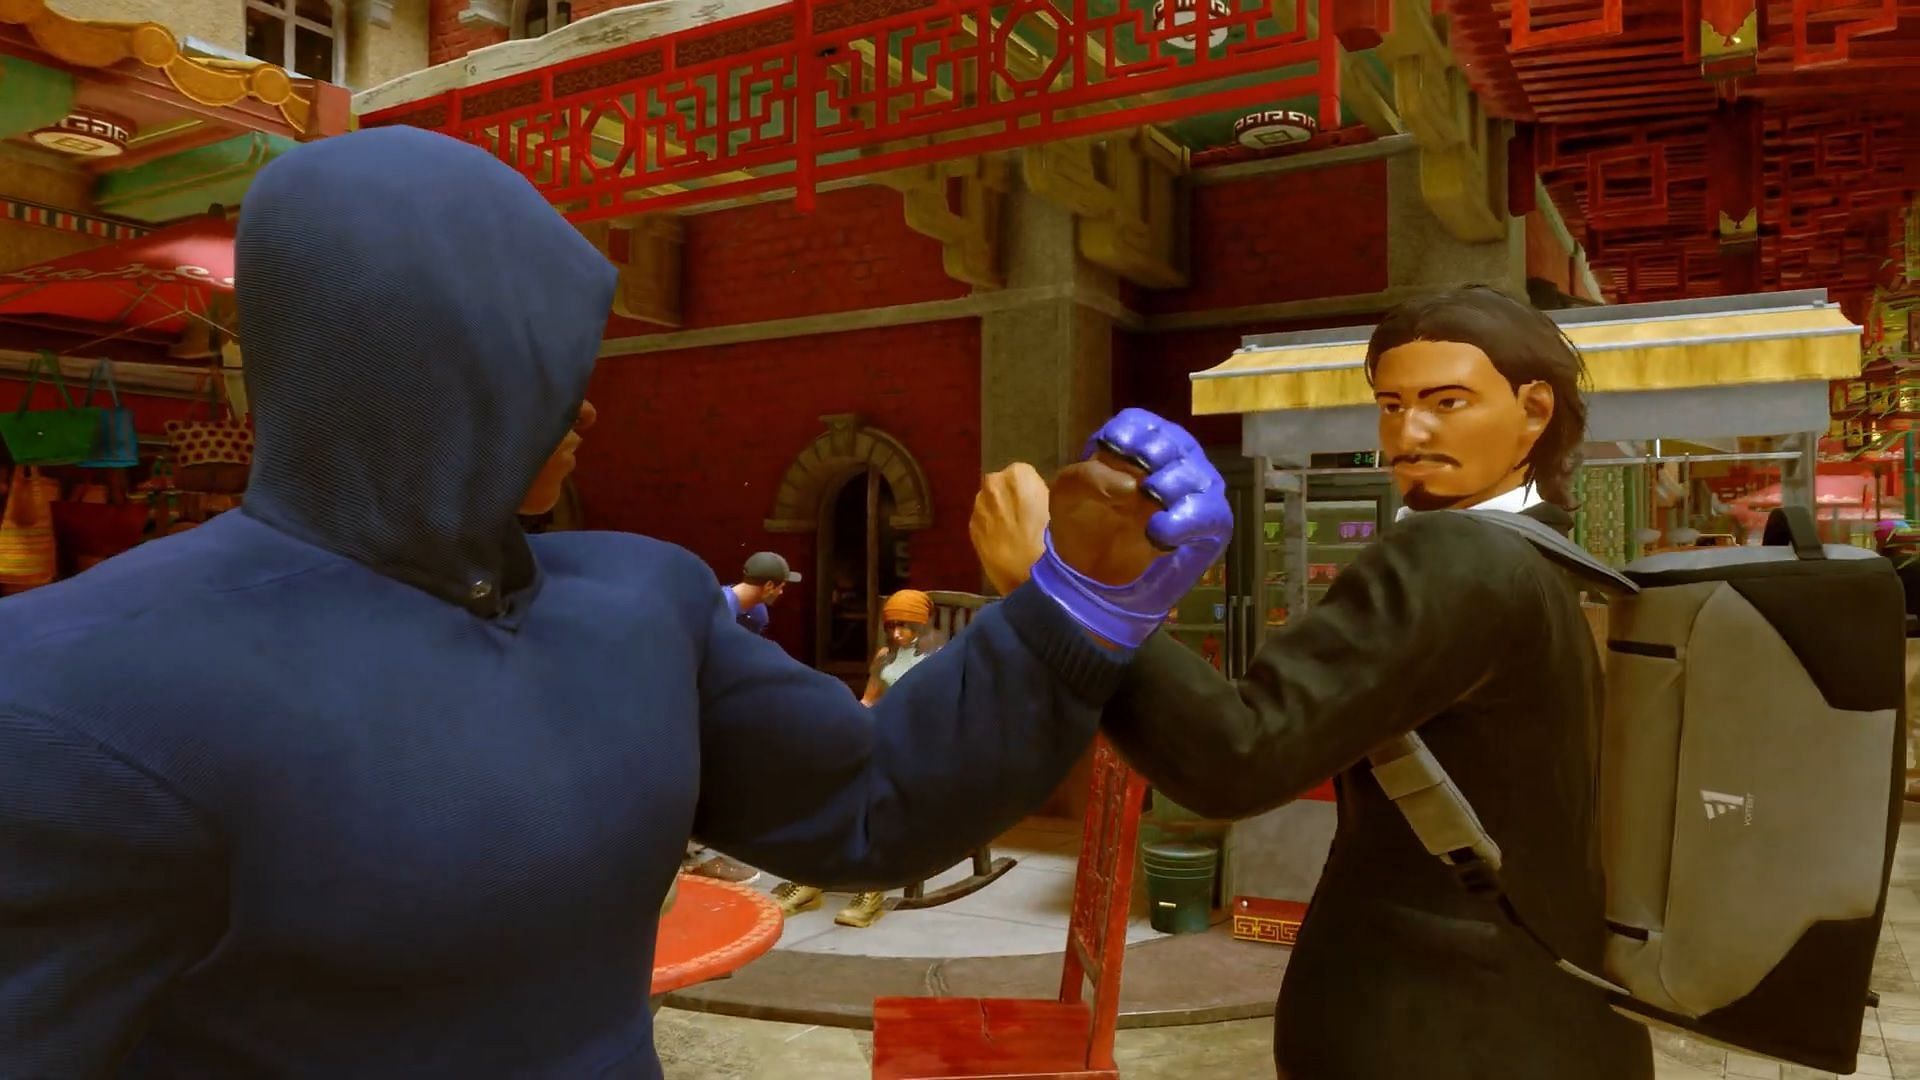 The hooded figure is possibly a player character (Image via Capcom)